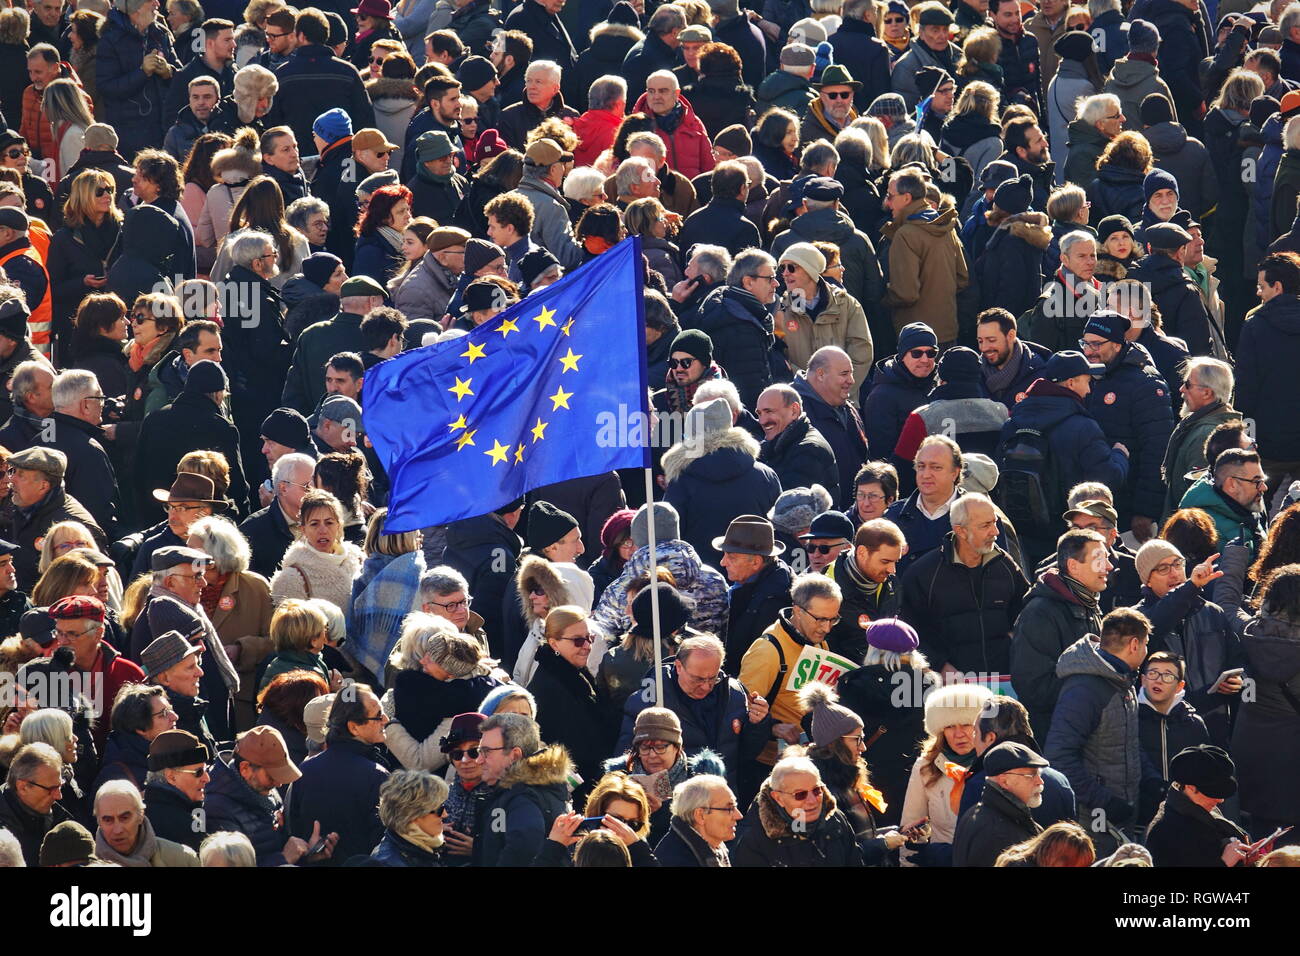 Demonstration in favour of the European Union against nationalist movements. Turin, Italy - January 2019 Stock Photo